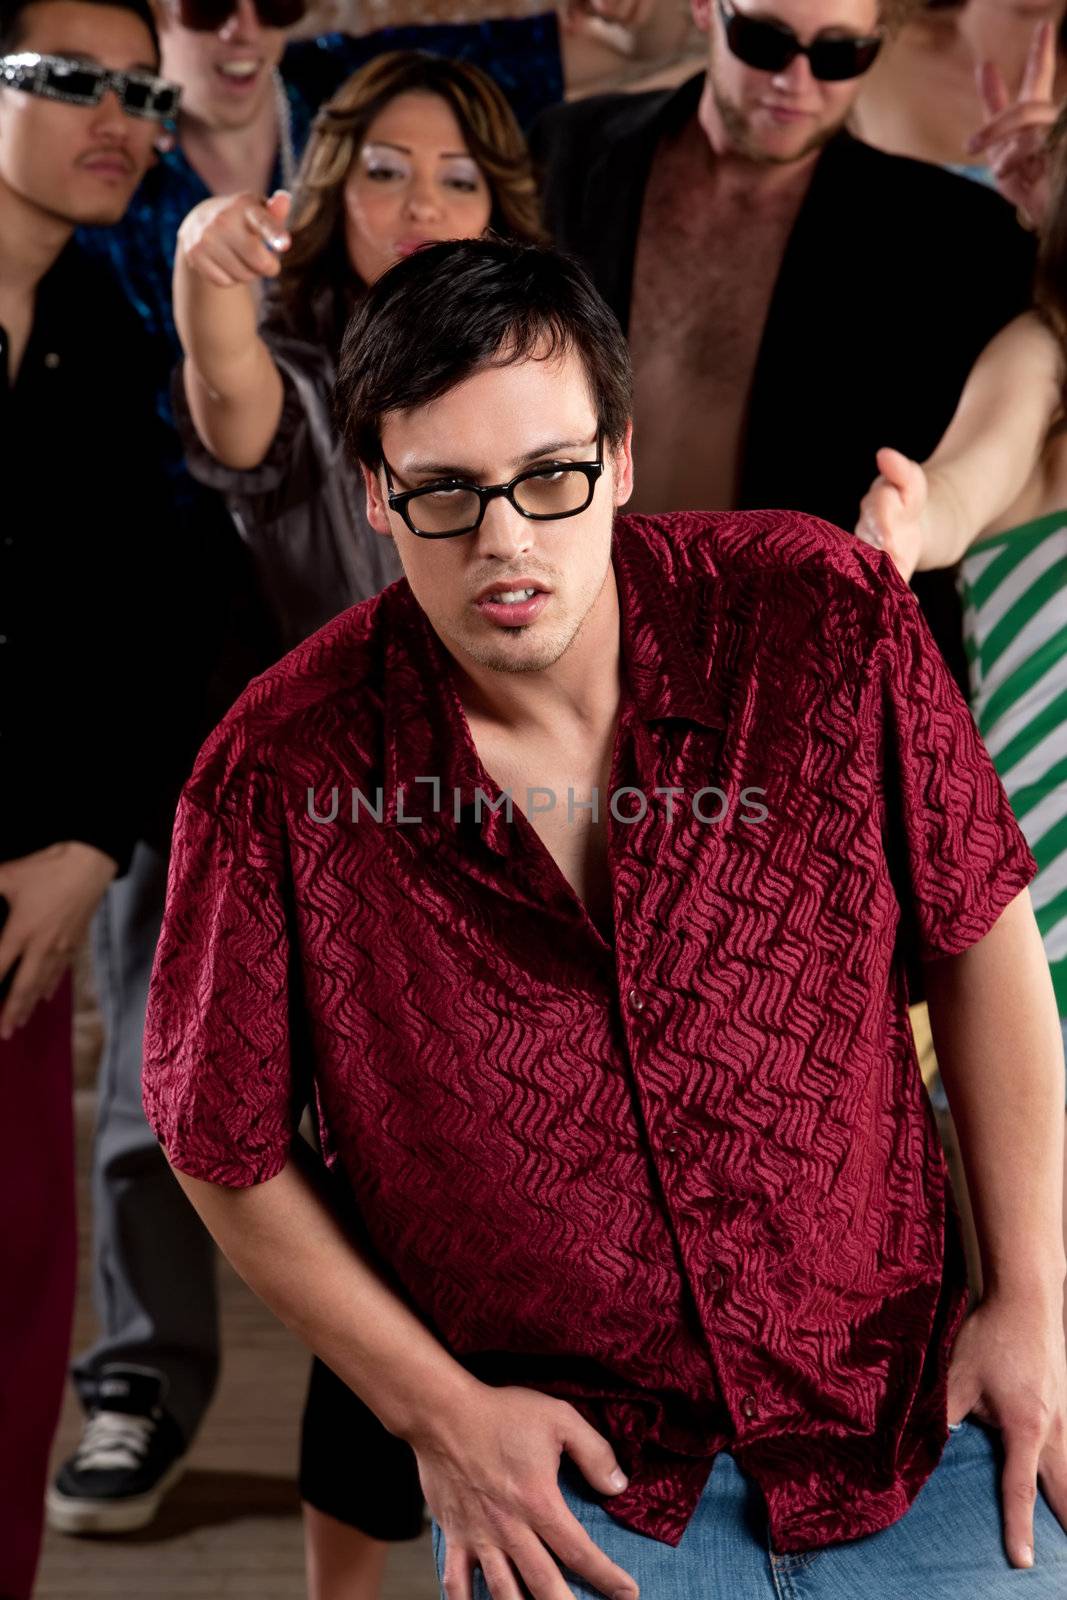 Nerdy young man stumbling at a 1970s Disco Music Party